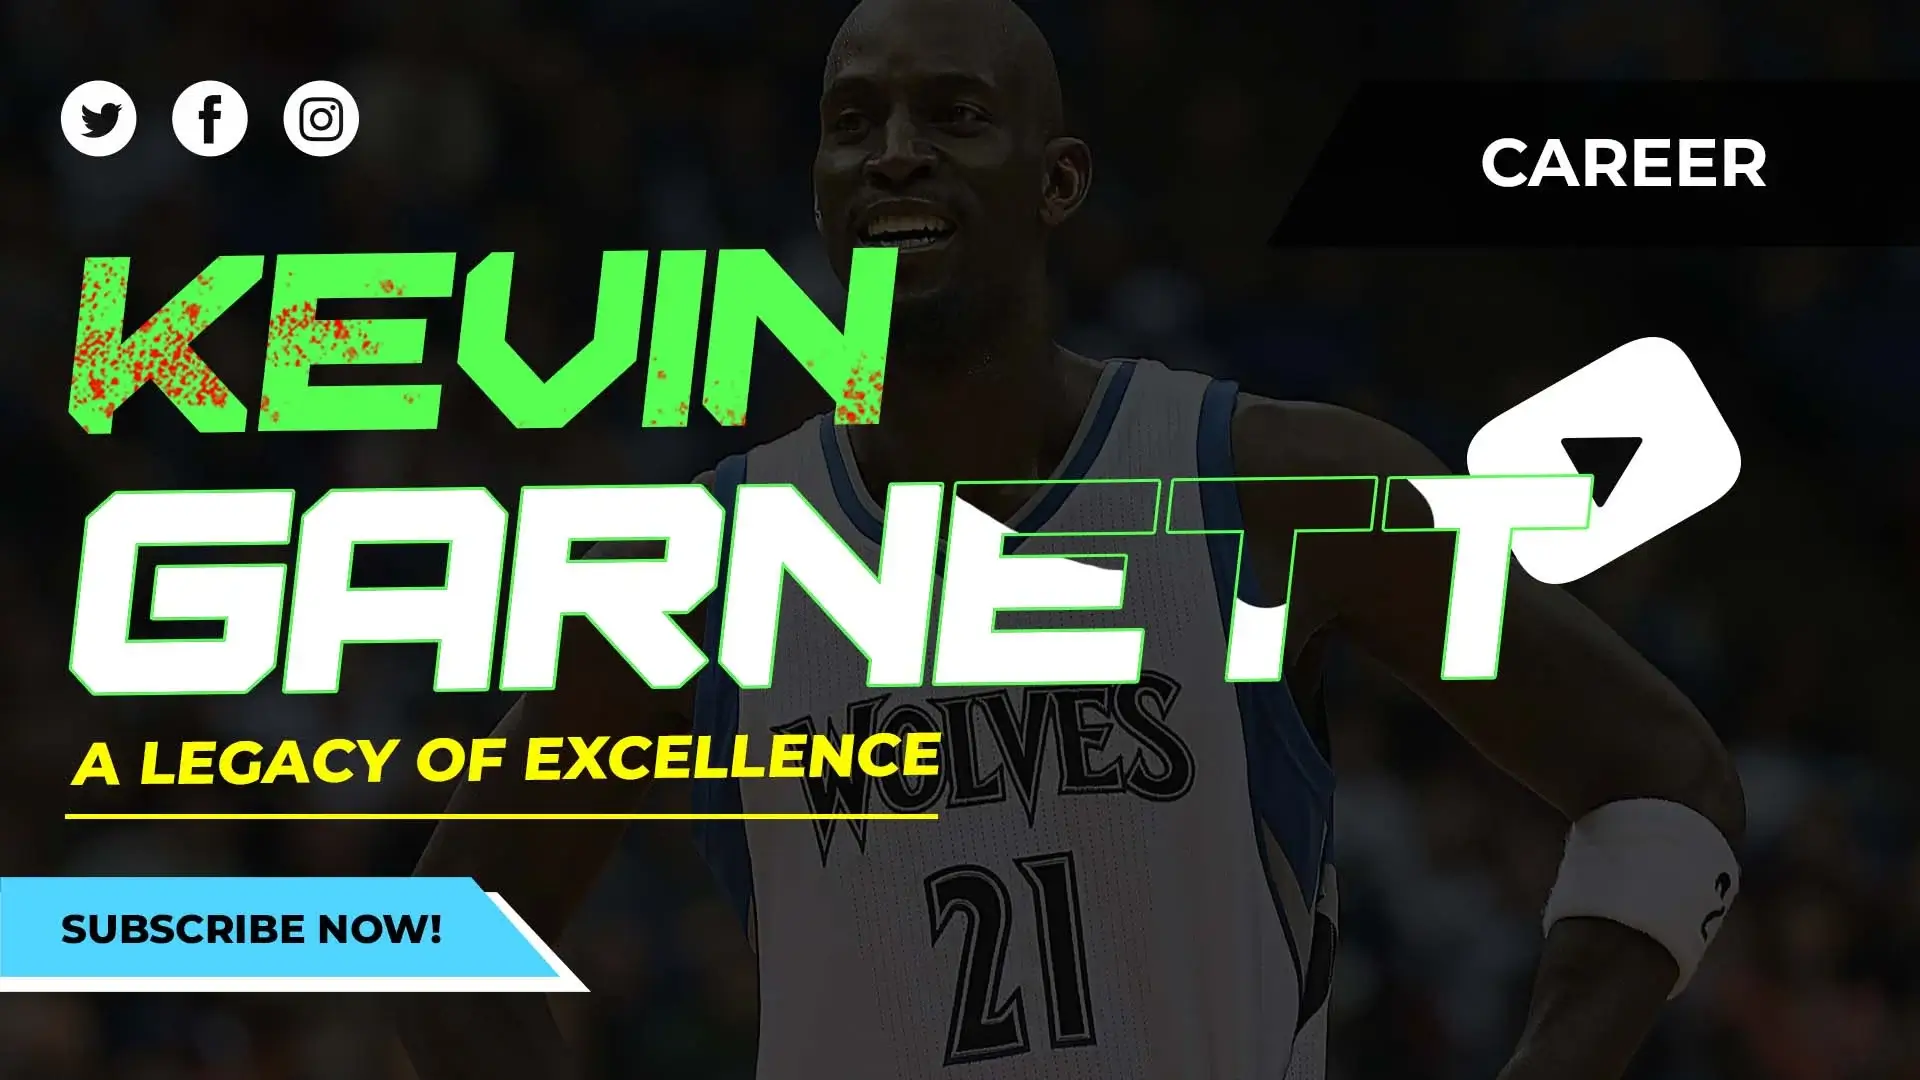 Kevin Garnett’s A Legacy of Excellence